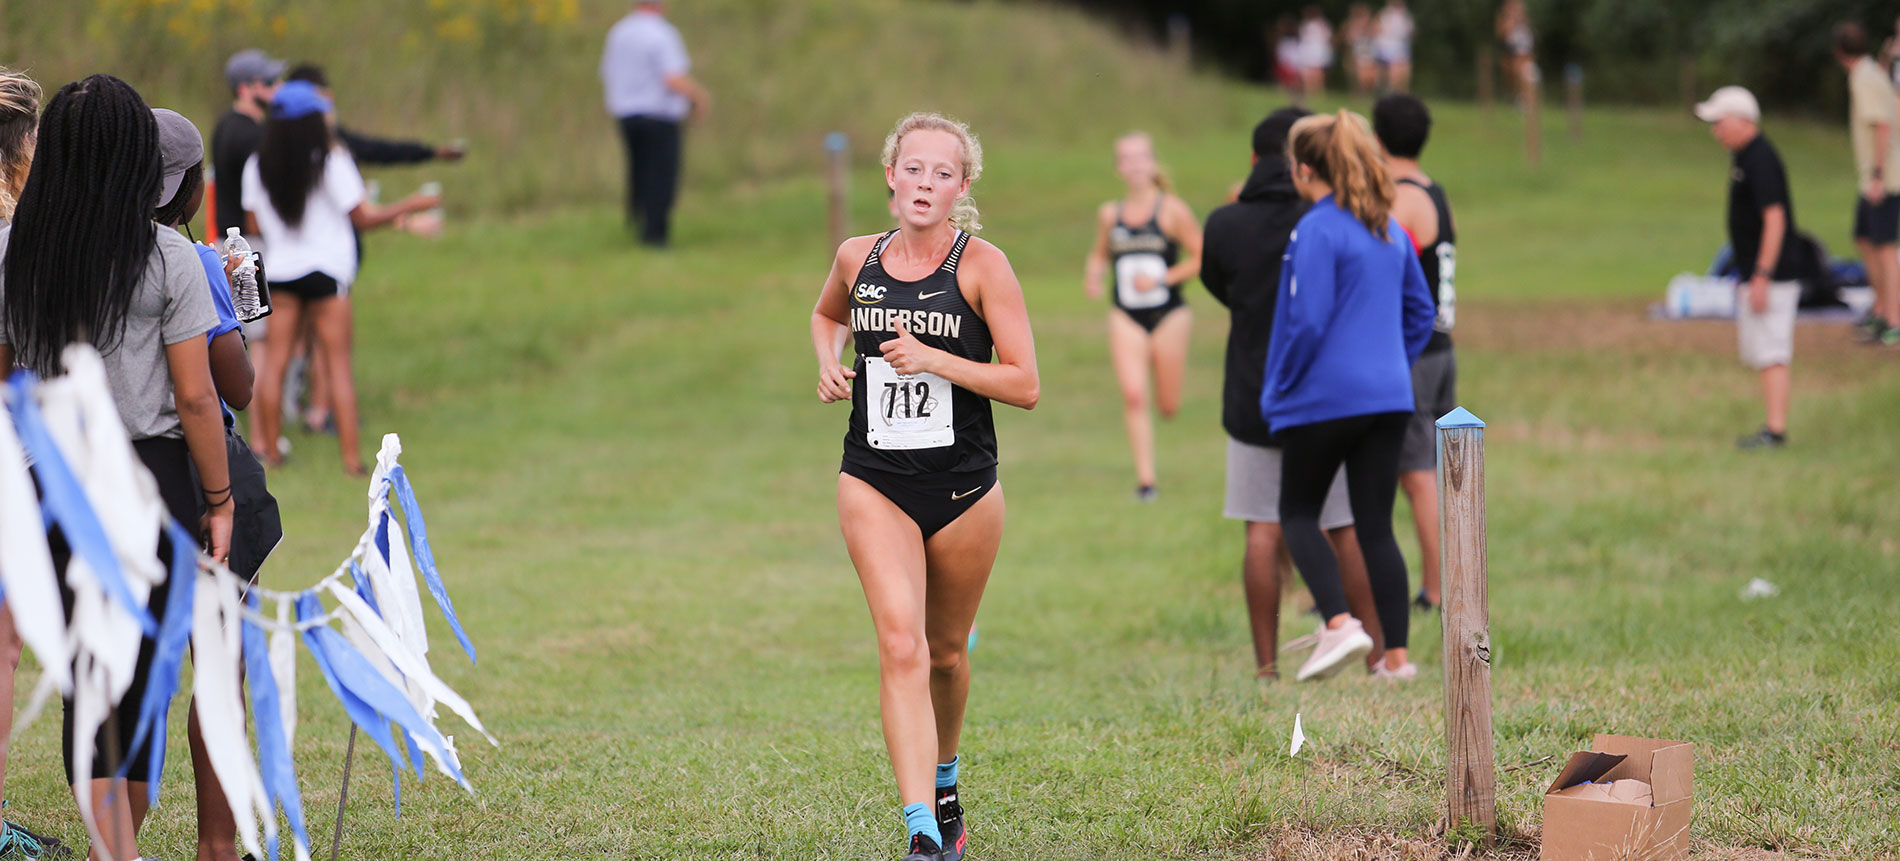 Women’s Cross Country Finishes Ninth at the Rock Pre-National Meet